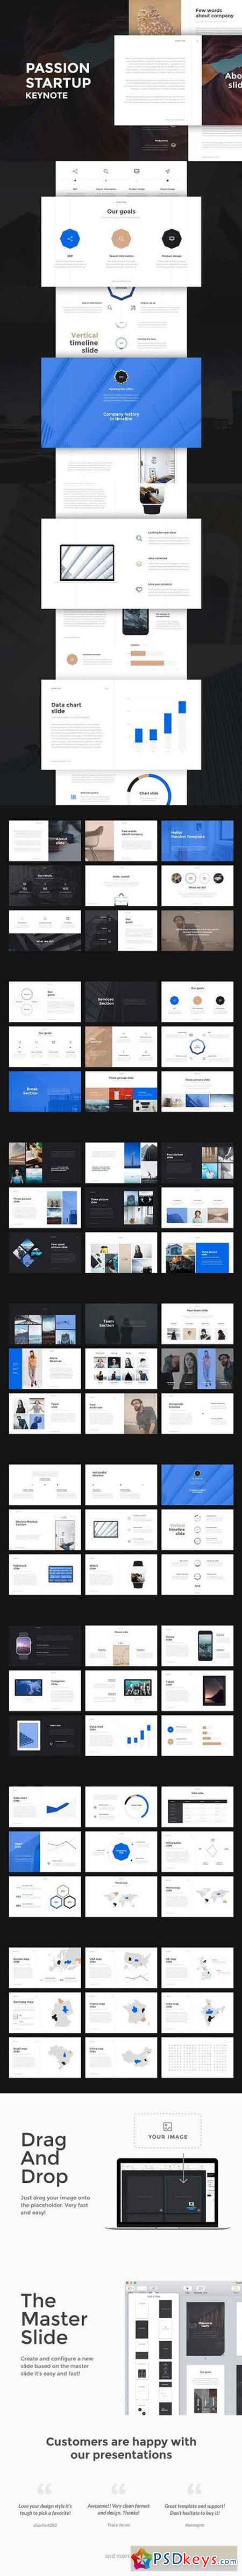 Passion Keynote Template + GIFT 1409802